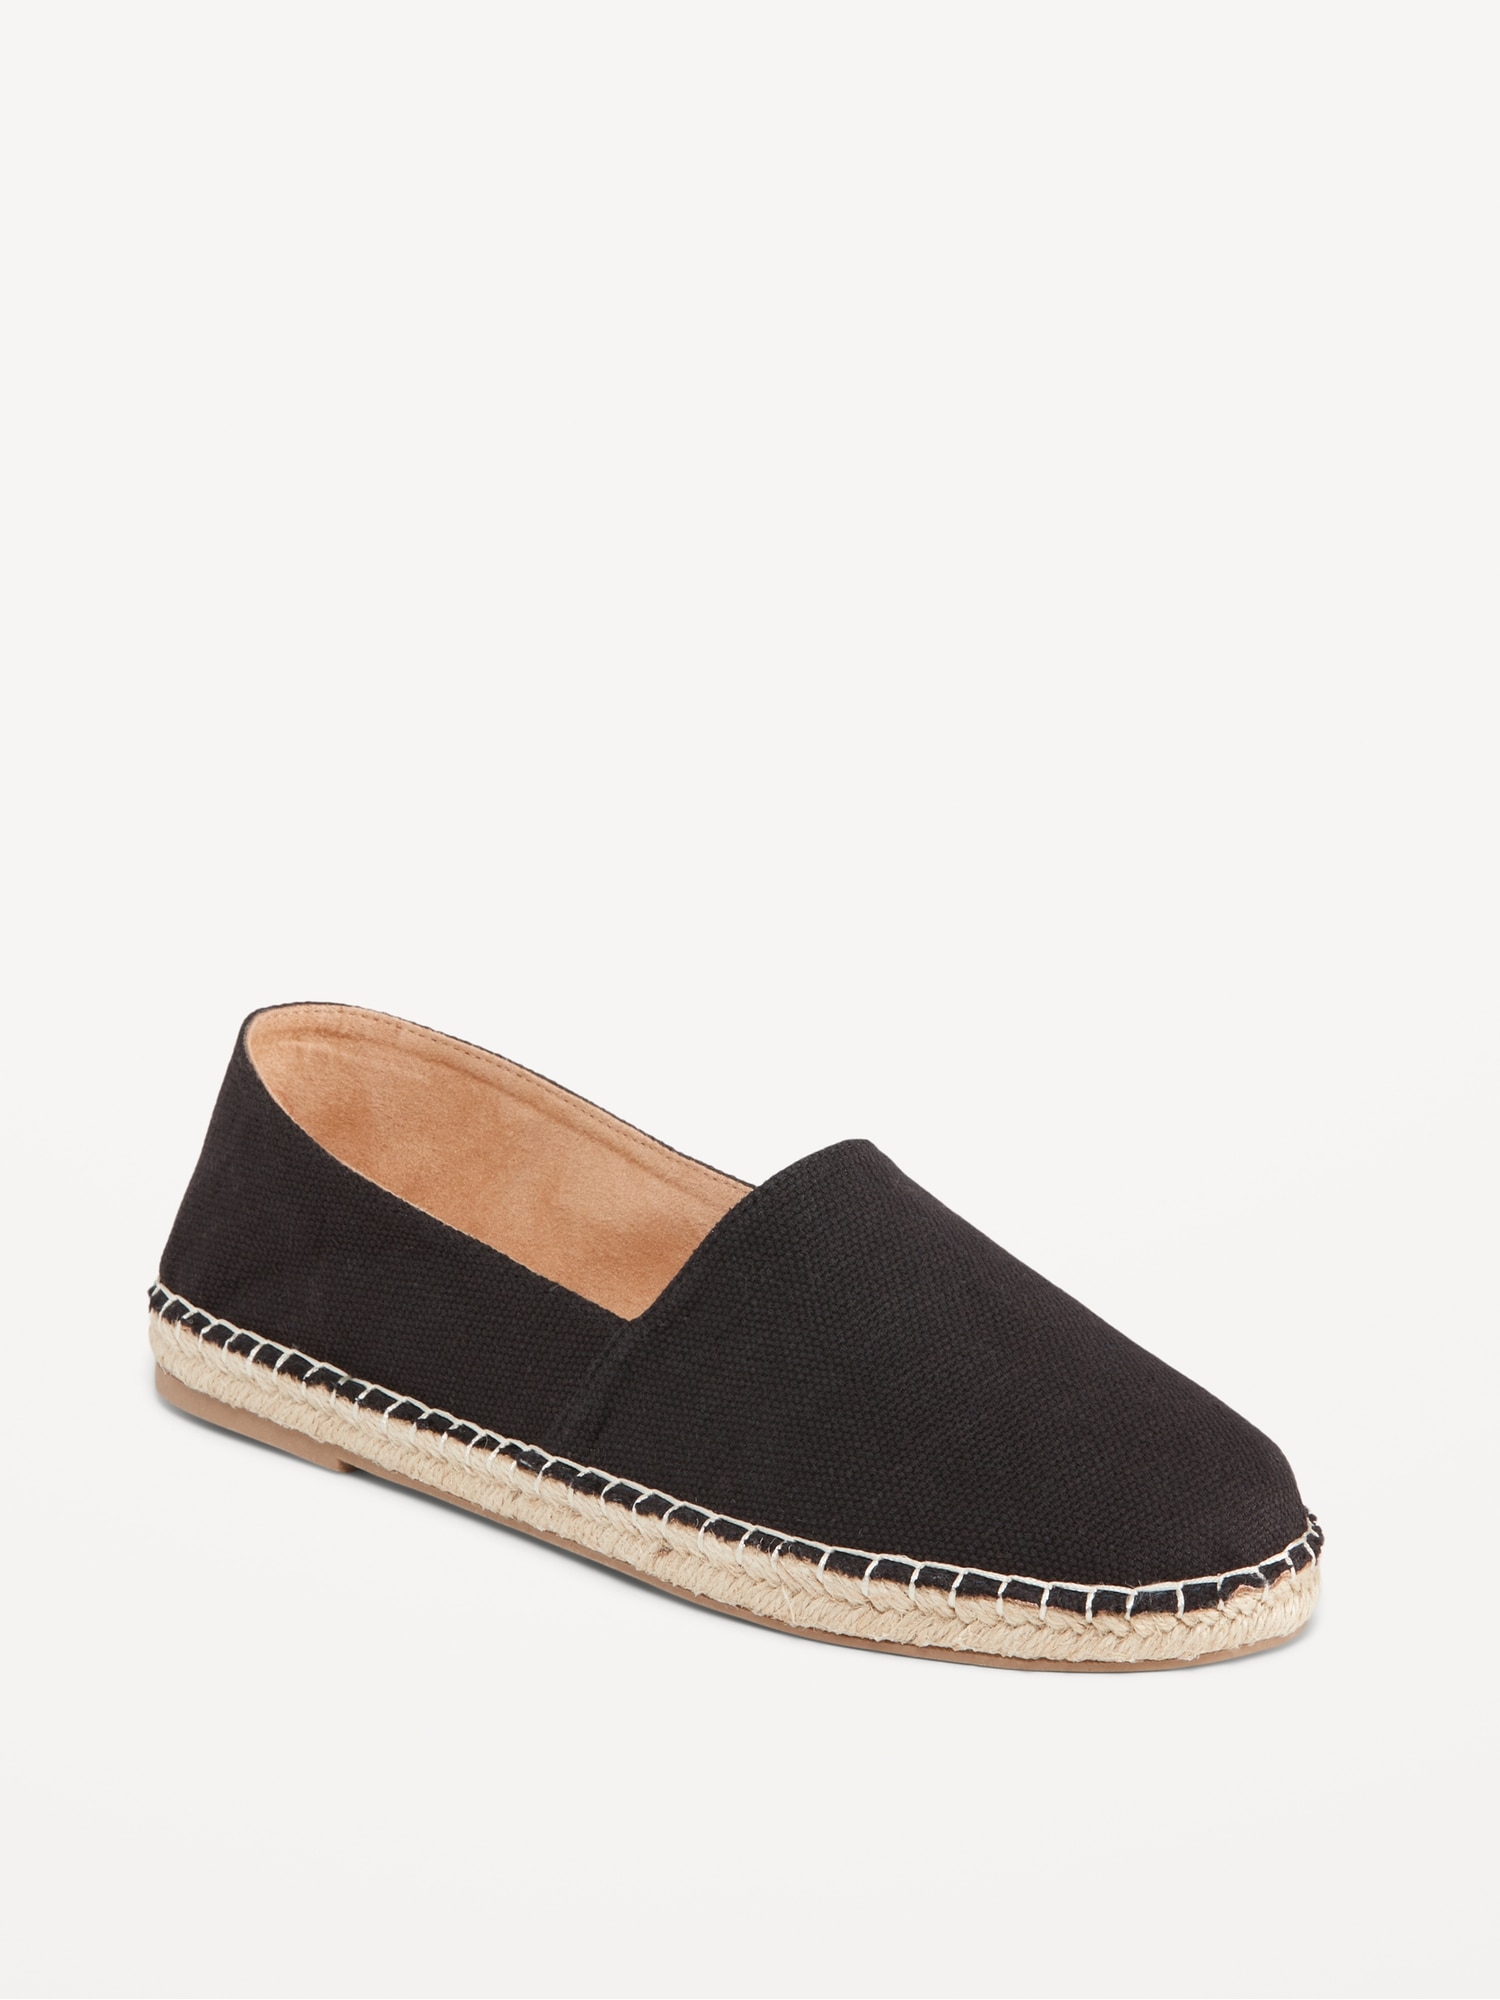 Old Navy Canvas Espadrille Flats for Women black. 1